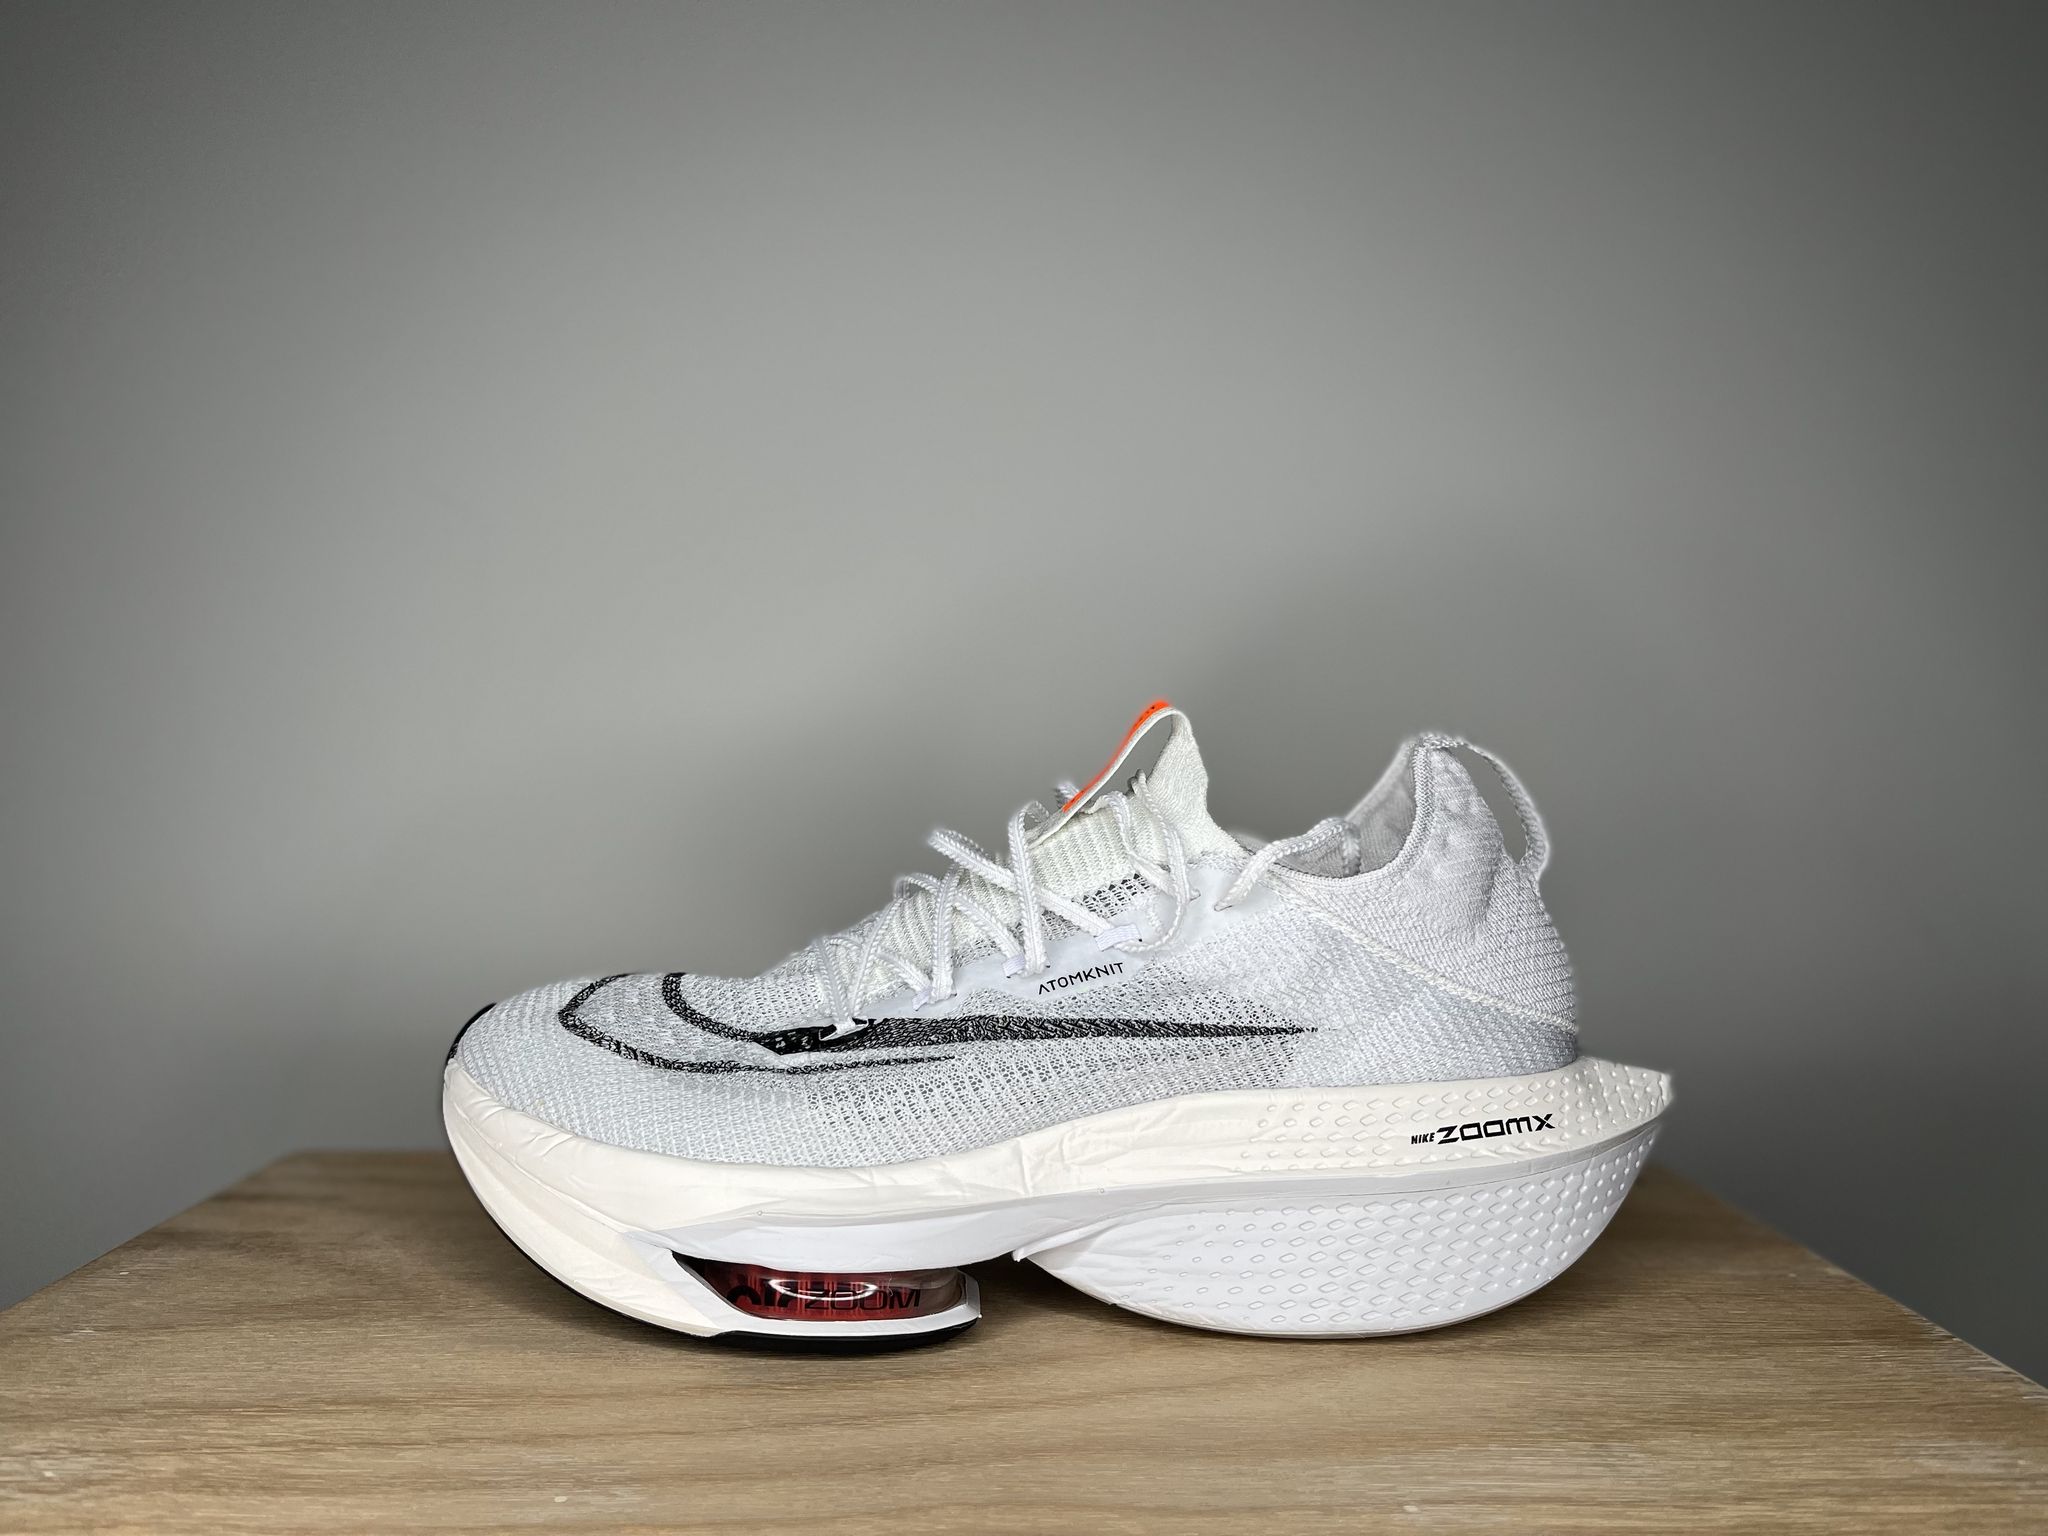 Nike Launch Air Zoom Alphafly Next% - Review